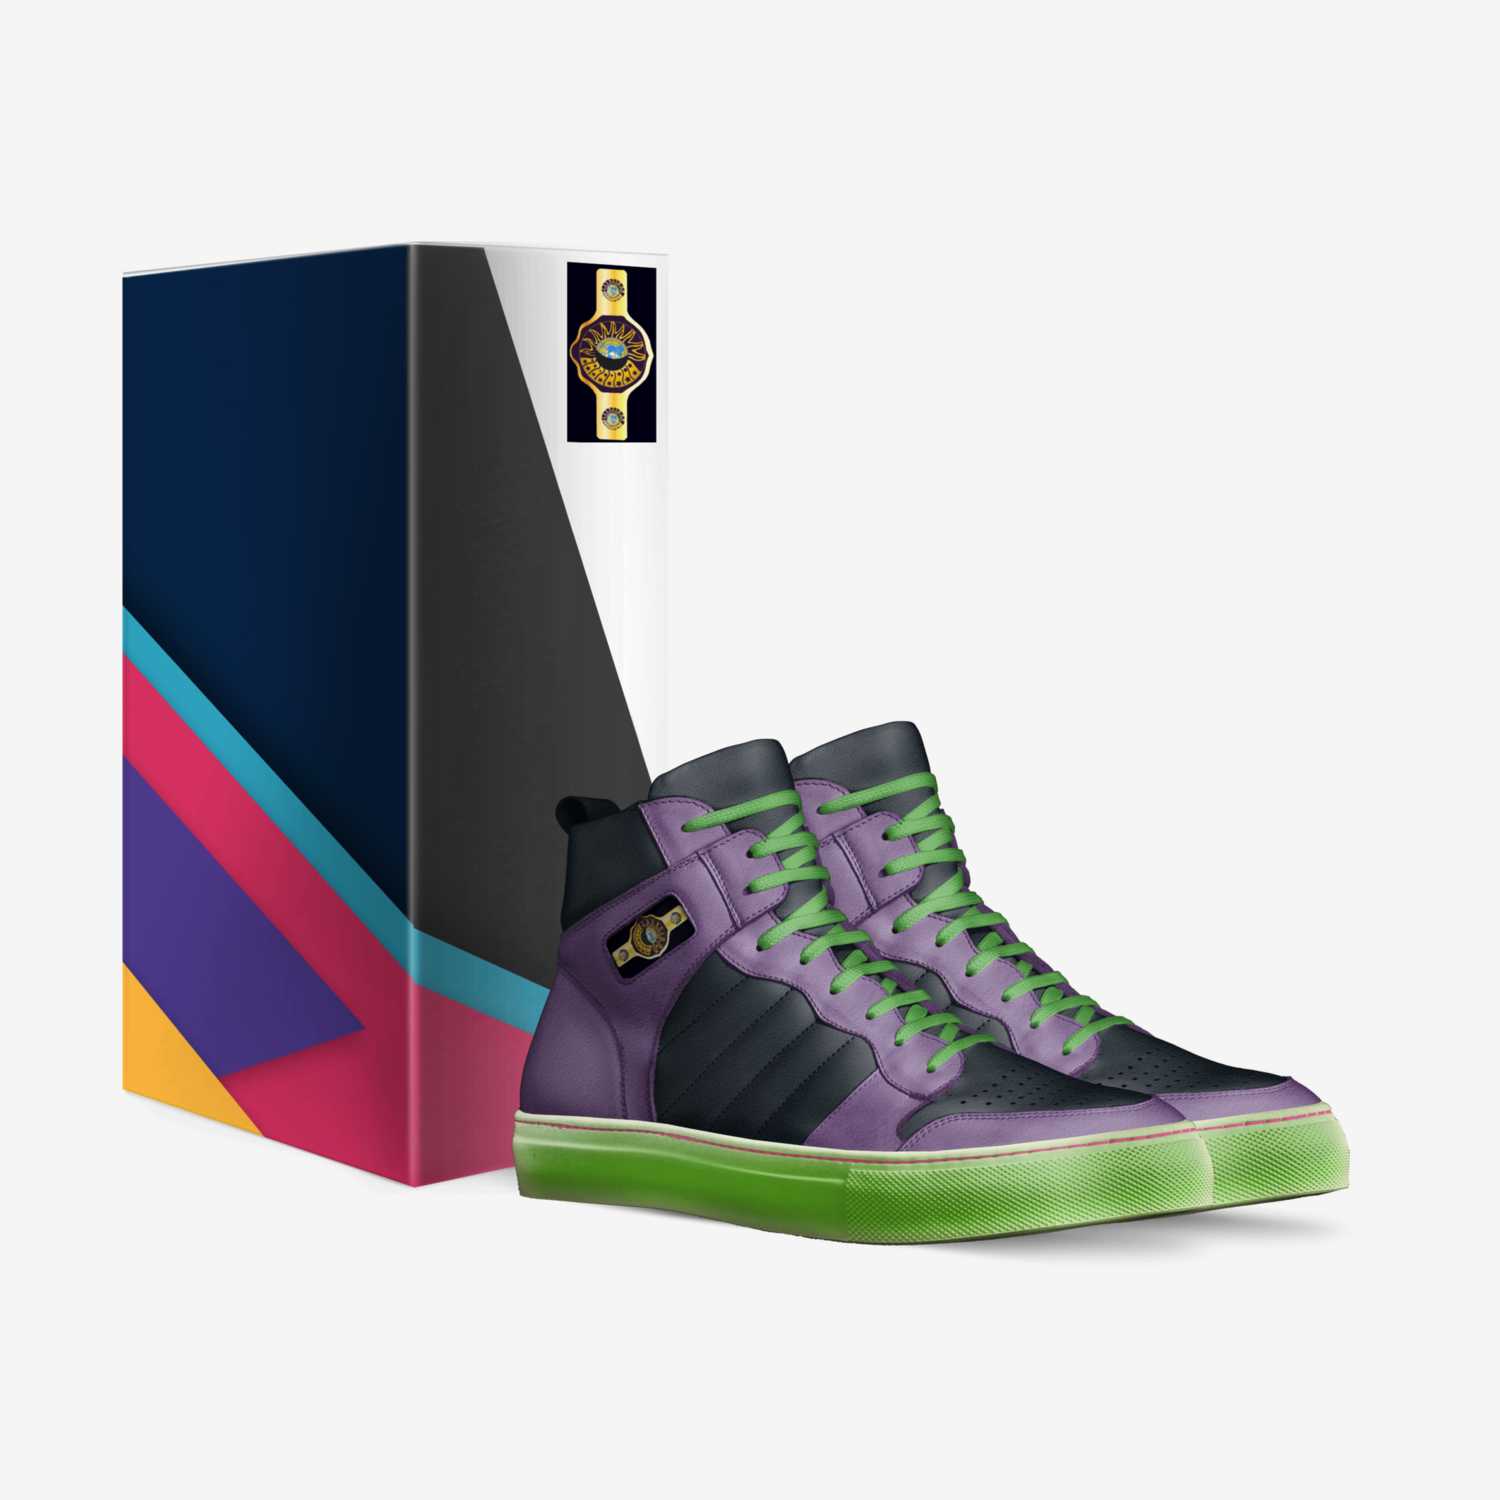 invader custom made in Italy shoes by Austin Freeman | Box view